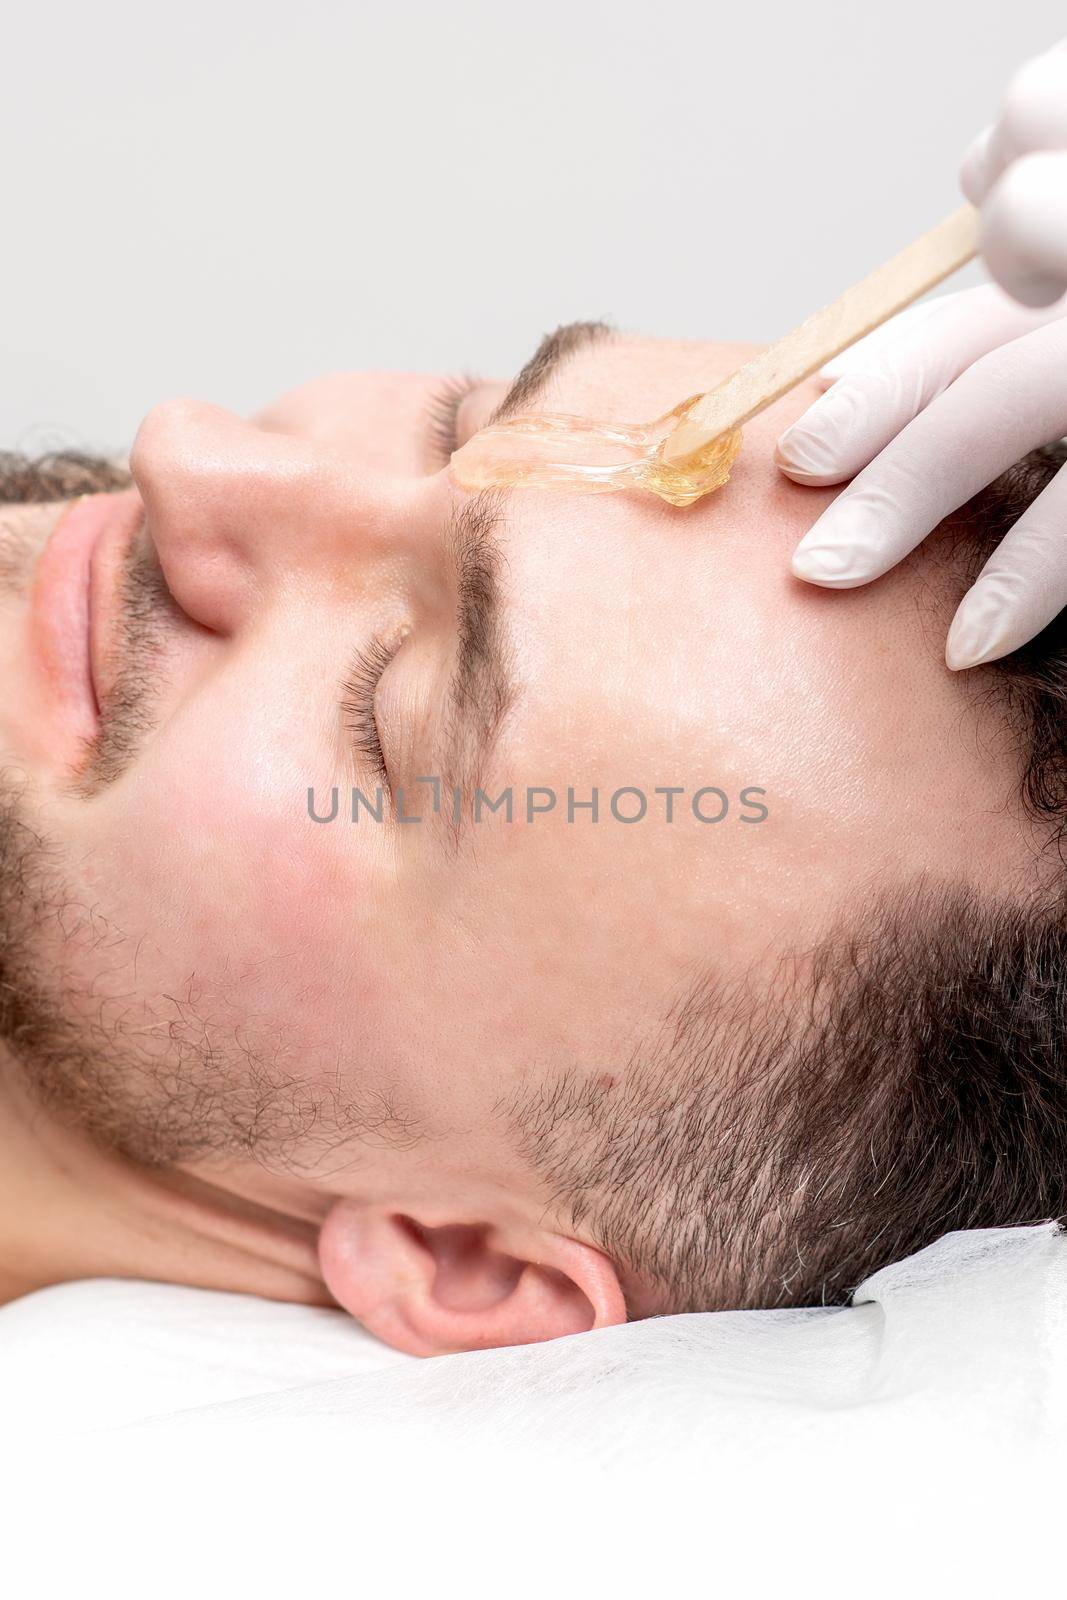 Beautician applies wax between male eyebrows before the procedure of waxing in the beauty salon.